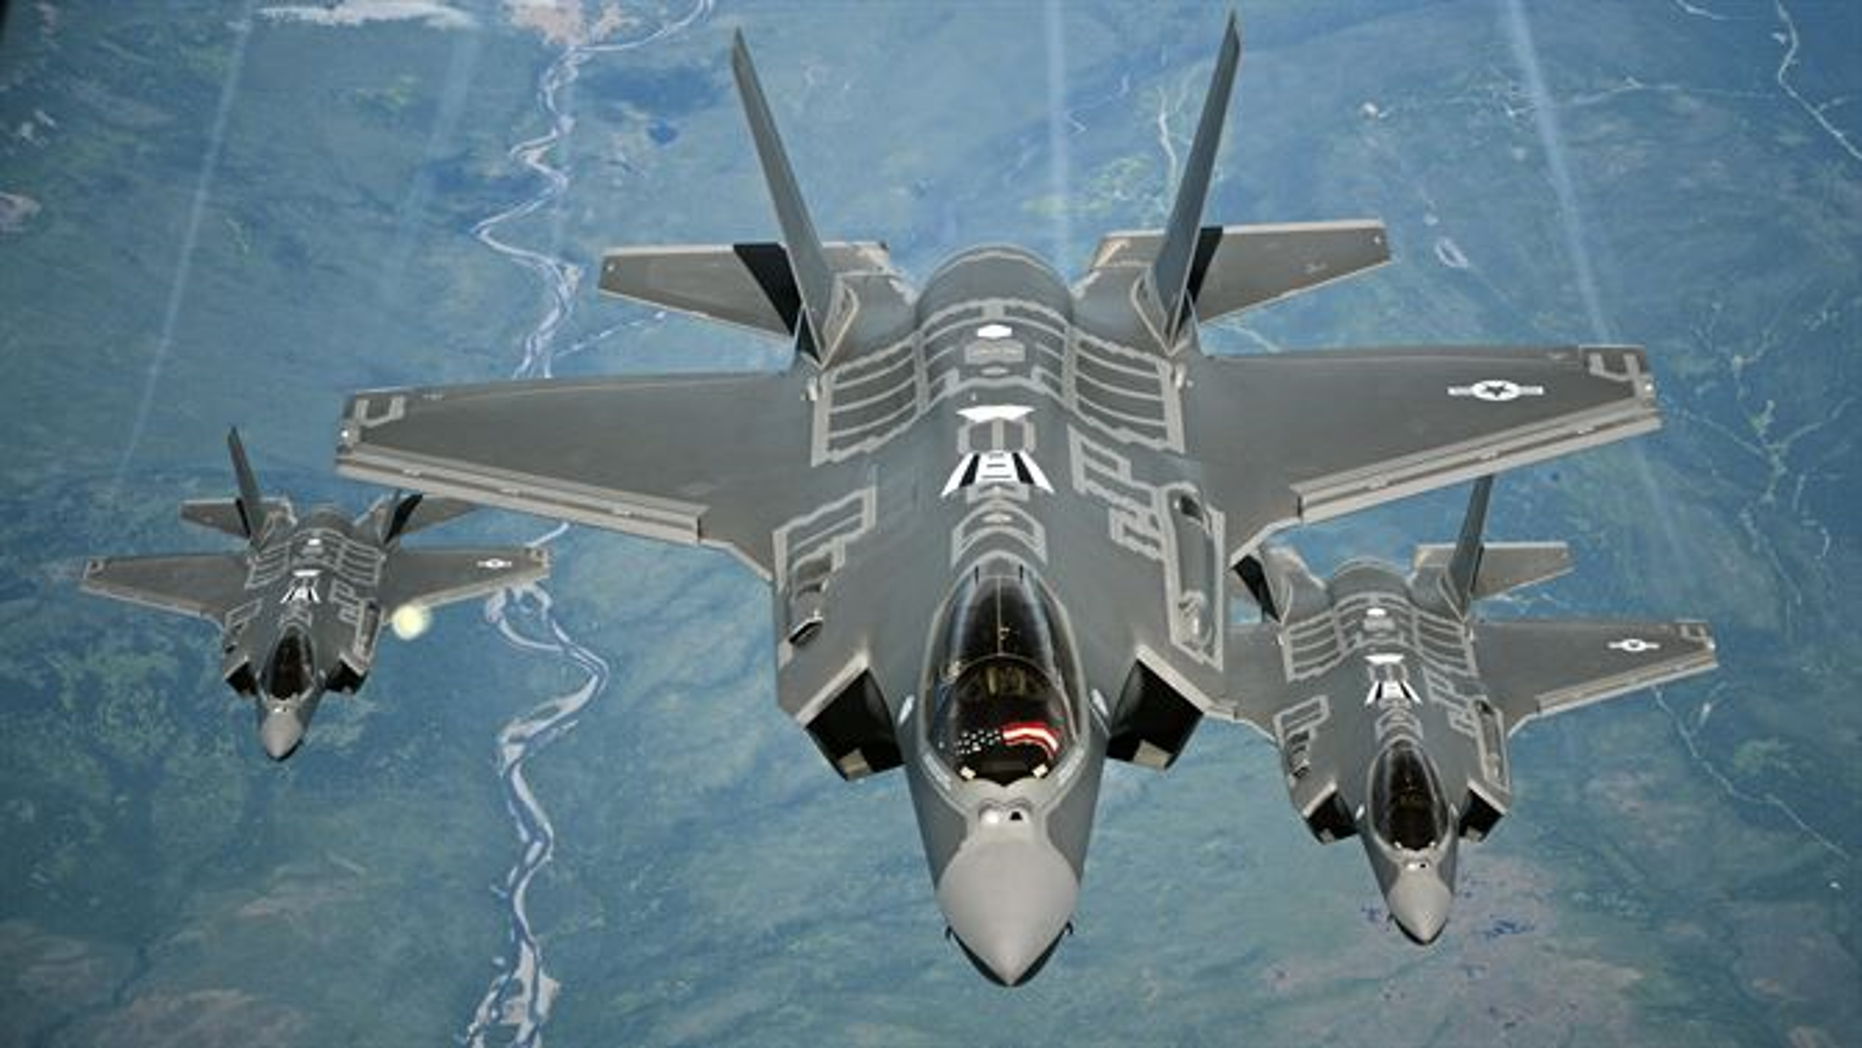 The Us Army Wants The F 35 For Close Air Support Fox News 